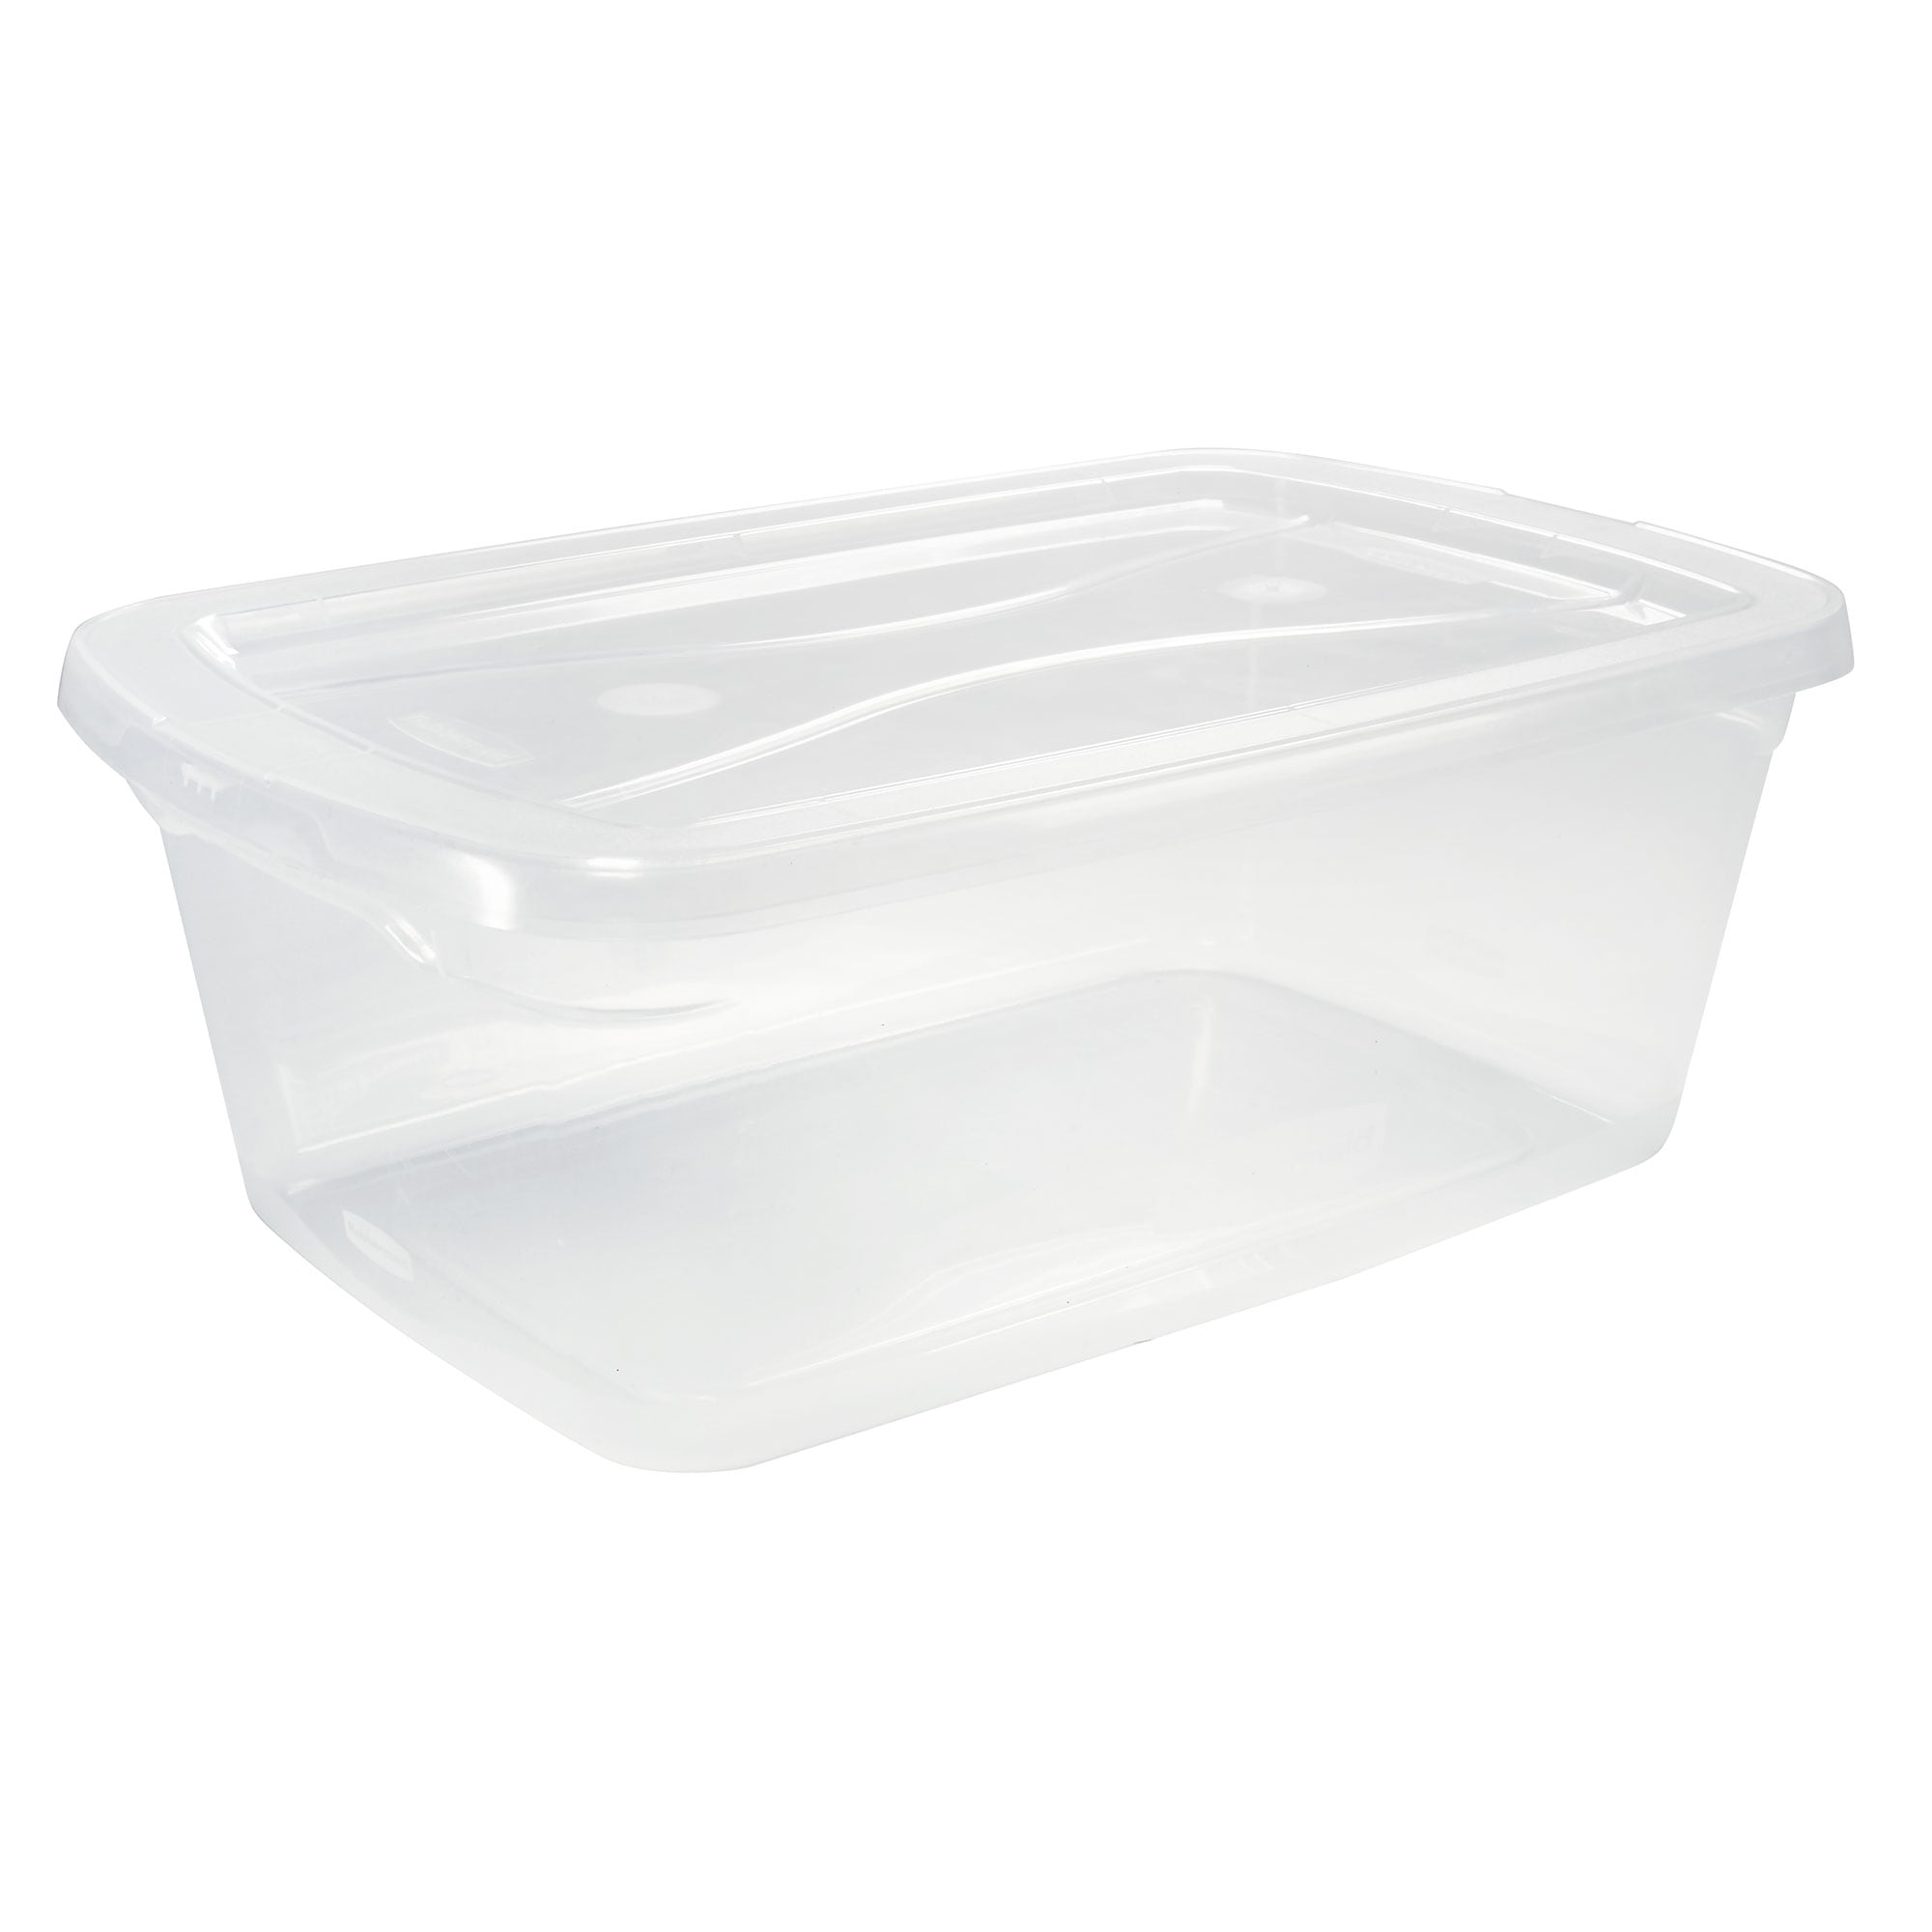 The Rubbermaid Space-Saving Plastic Storage Container Is on Sale